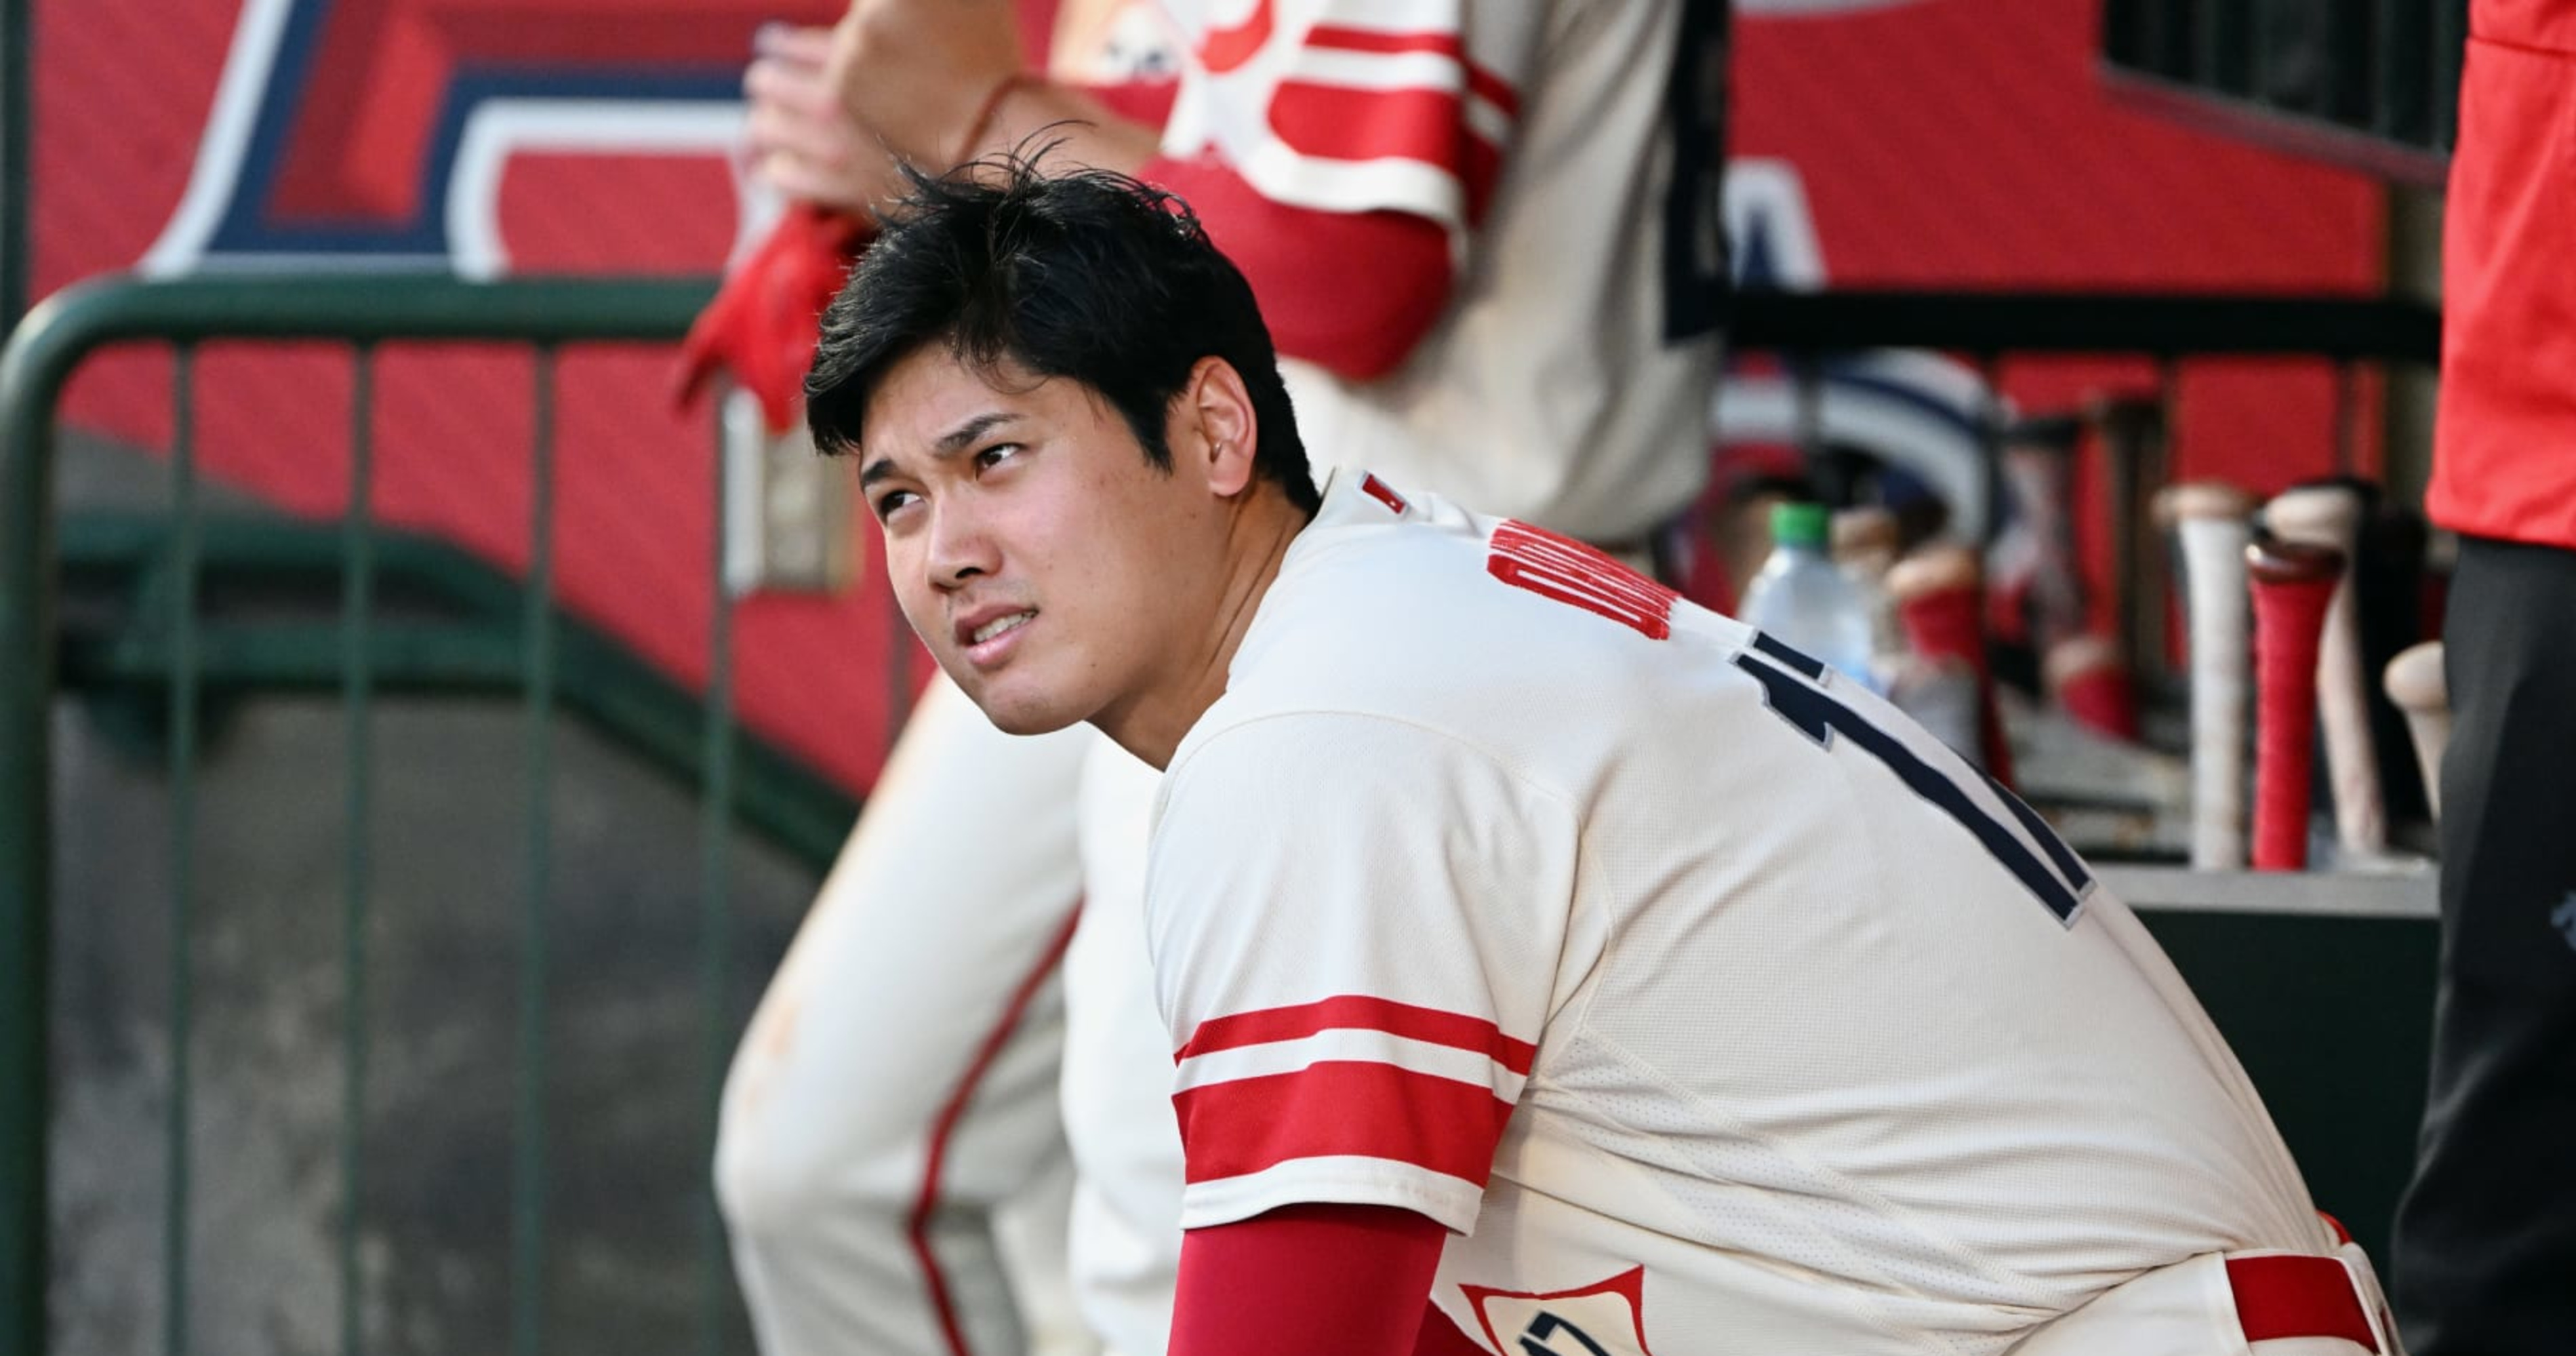 Off-Season Thought Experiment: The Astros Trade for Shohei Ohtani